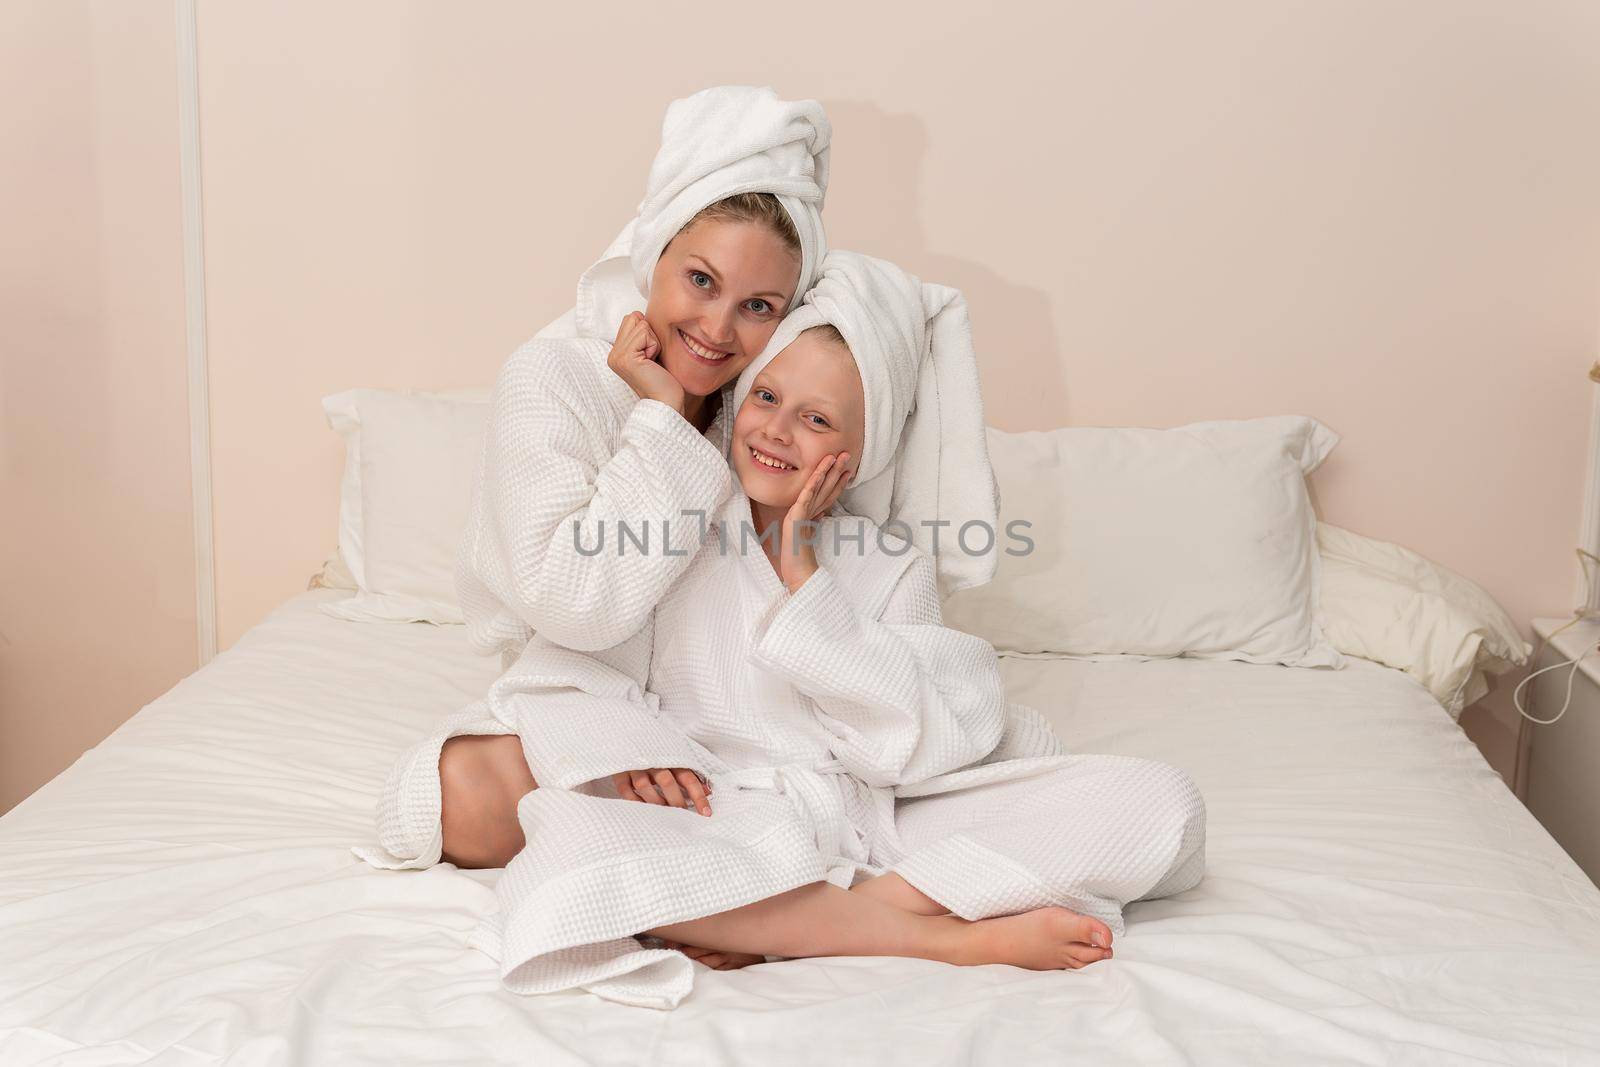 Daughter mom smiling dries bath love thinks elbows Creek copyspace, for portrait hygiene in pretty for skin beauty, towel baby. Head funny comfort, by 89167702191